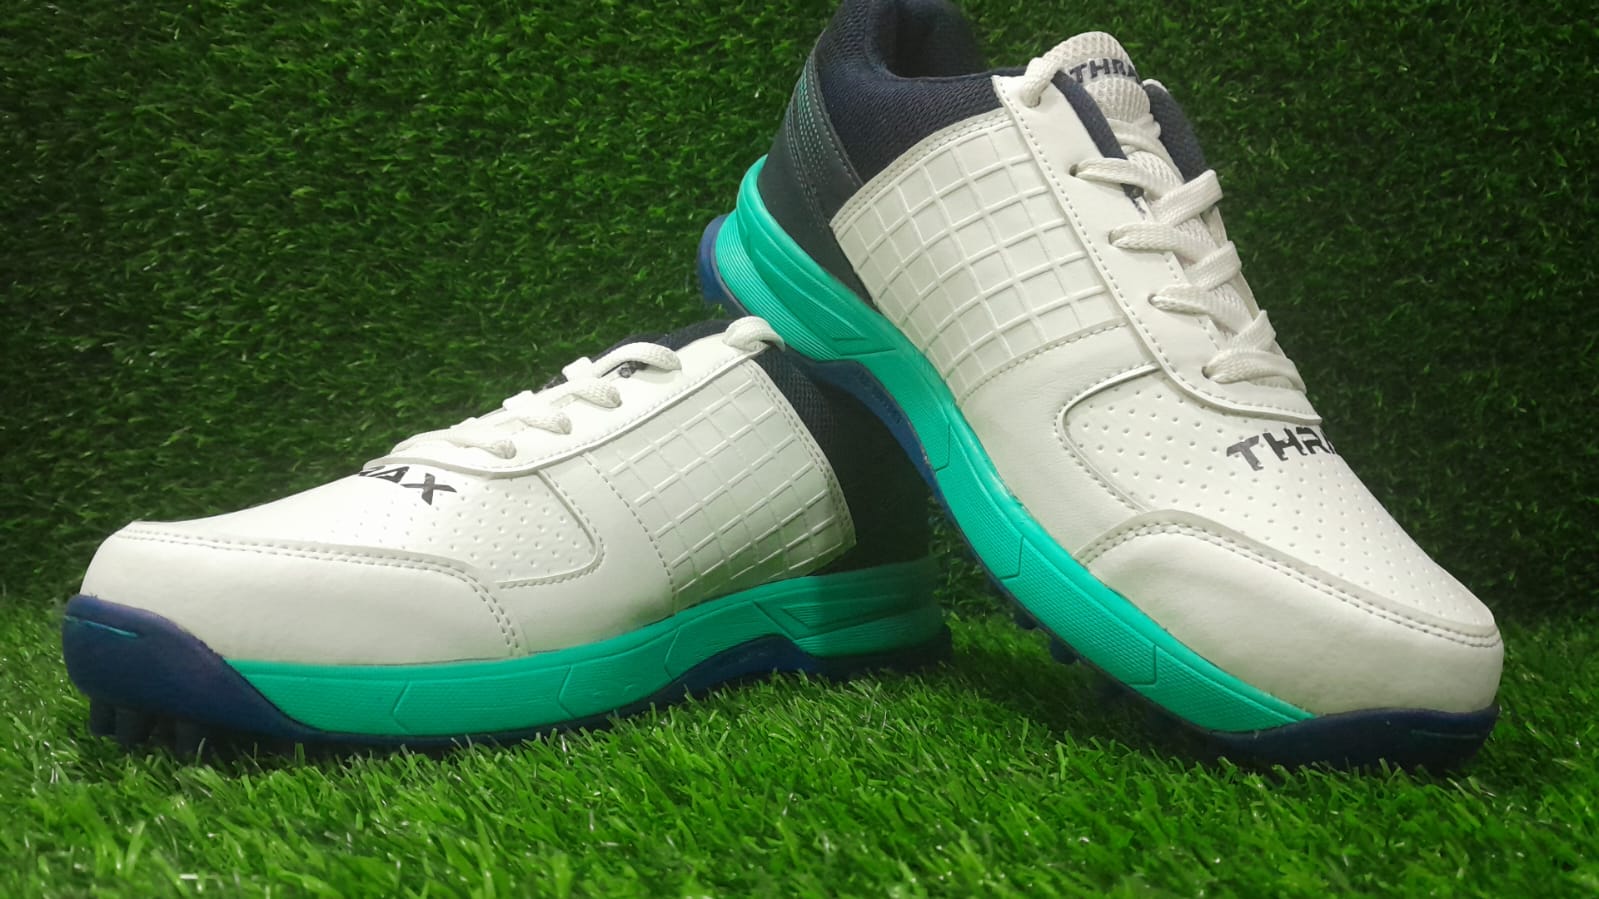  Thrax Hoop Cricket Rubber Stud Cricket Shoes White Blue Sea green